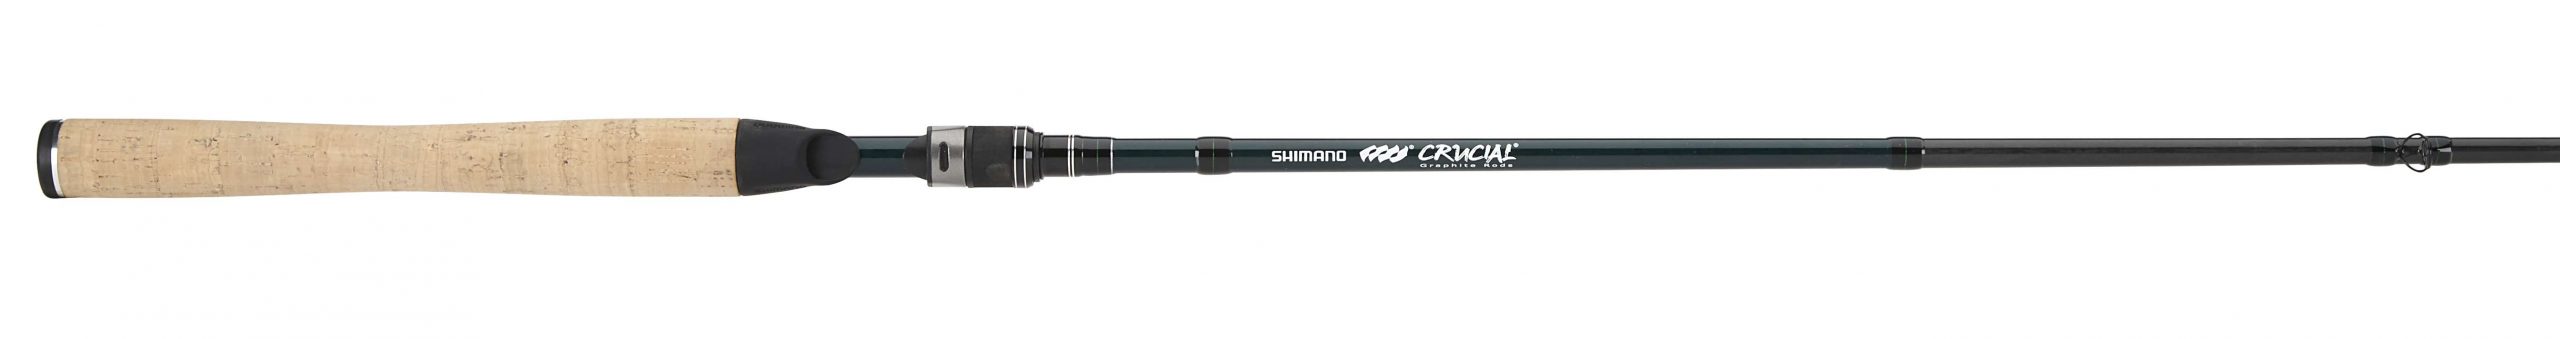 <p>Shimano Crucial Full cork Handle Newly designed with Shimanoâs C4S-HM blank construction â lighter and providing anglers both stronger hook-up and hang down strength, the Crucial rod series â 21 casting models, 17 spinning - are offered in popular powers and actions for across the board fishing action. And depending on personal preference, anglers can select from either full grip cork or split grip cork rear grips, and all models feature Fuji Alconite guides and Custom Shimano reel seats.</p>
